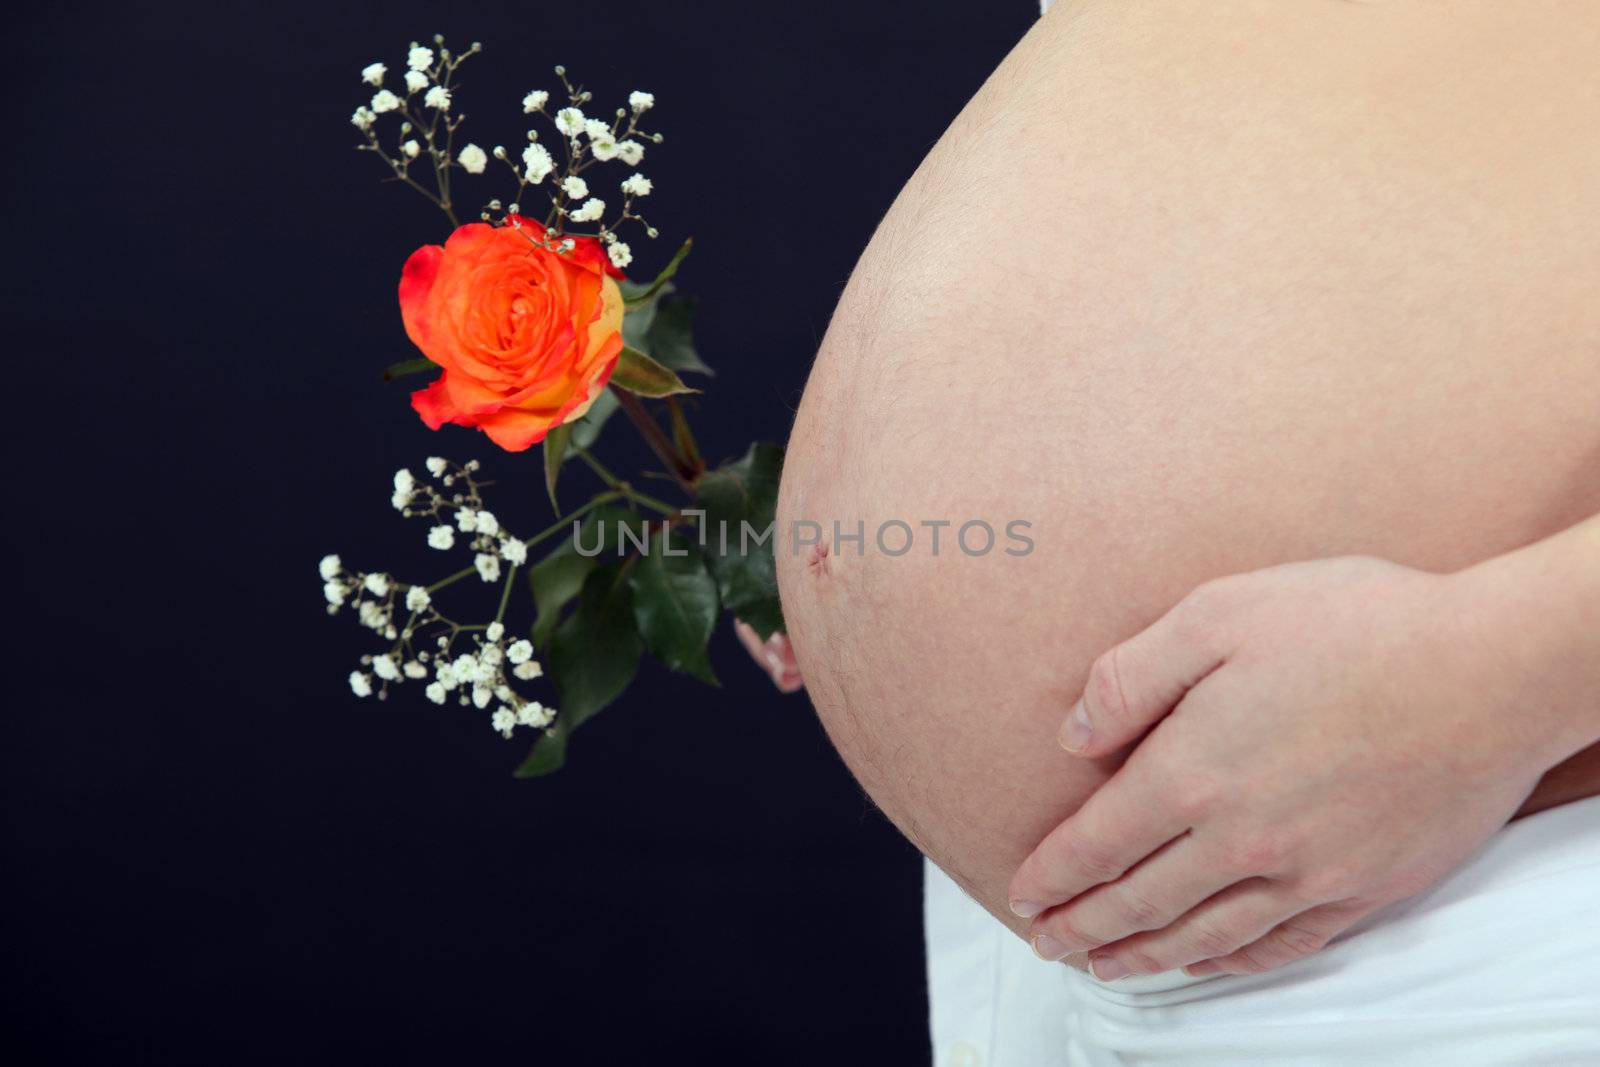 A pregnant woman with a flower.